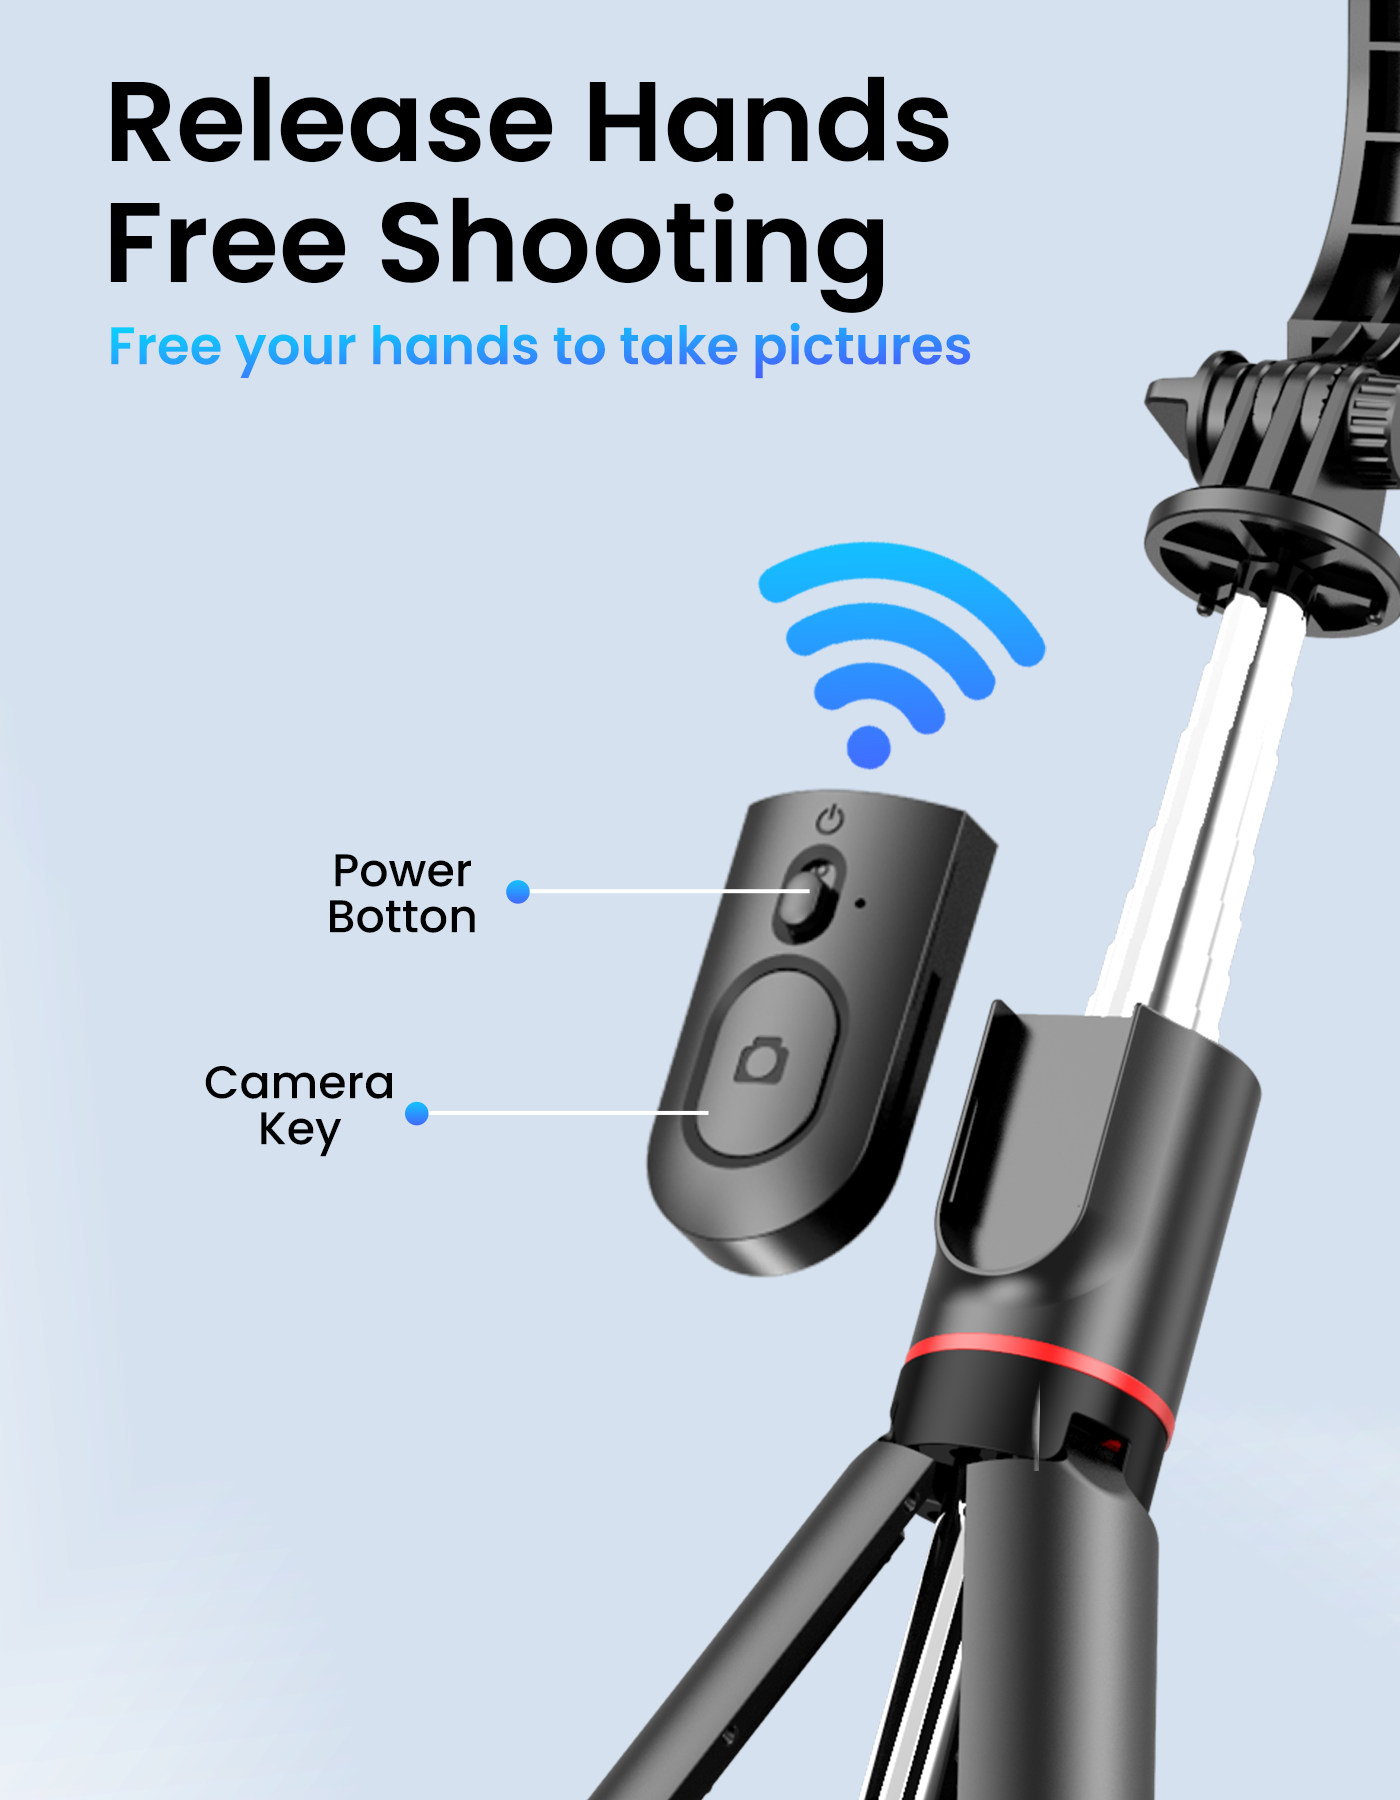 Portronics Lumistick - Smart Selfie Stick with wireless remote control to take picture